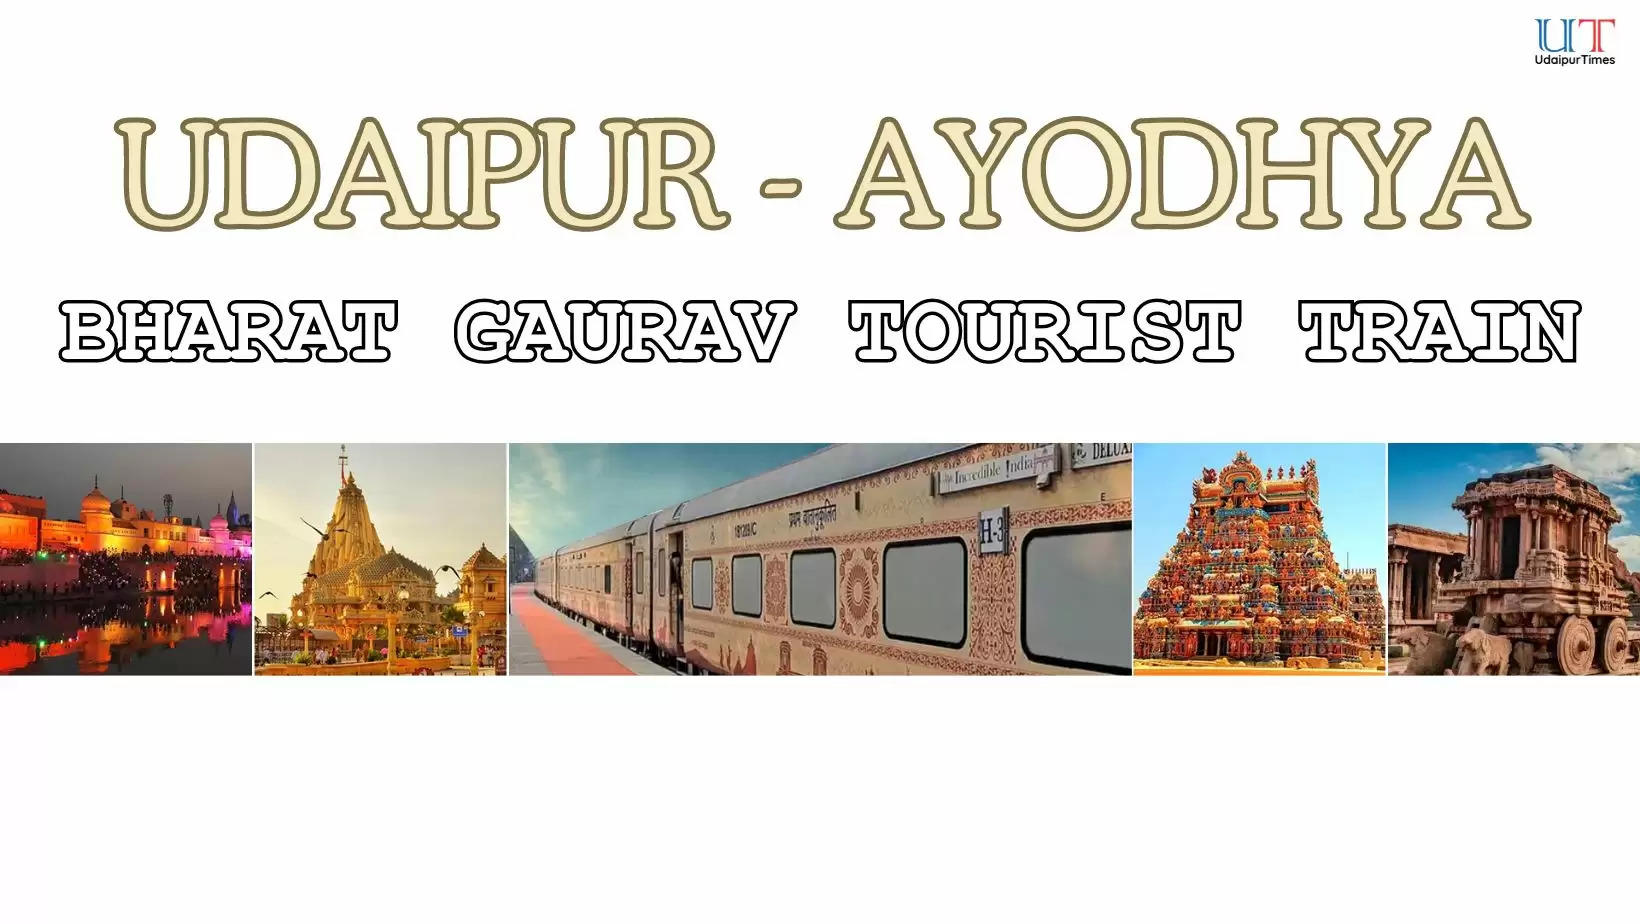 Bharat Gaurav Tourist Train from Udaipur to Ayodhya on 17 May